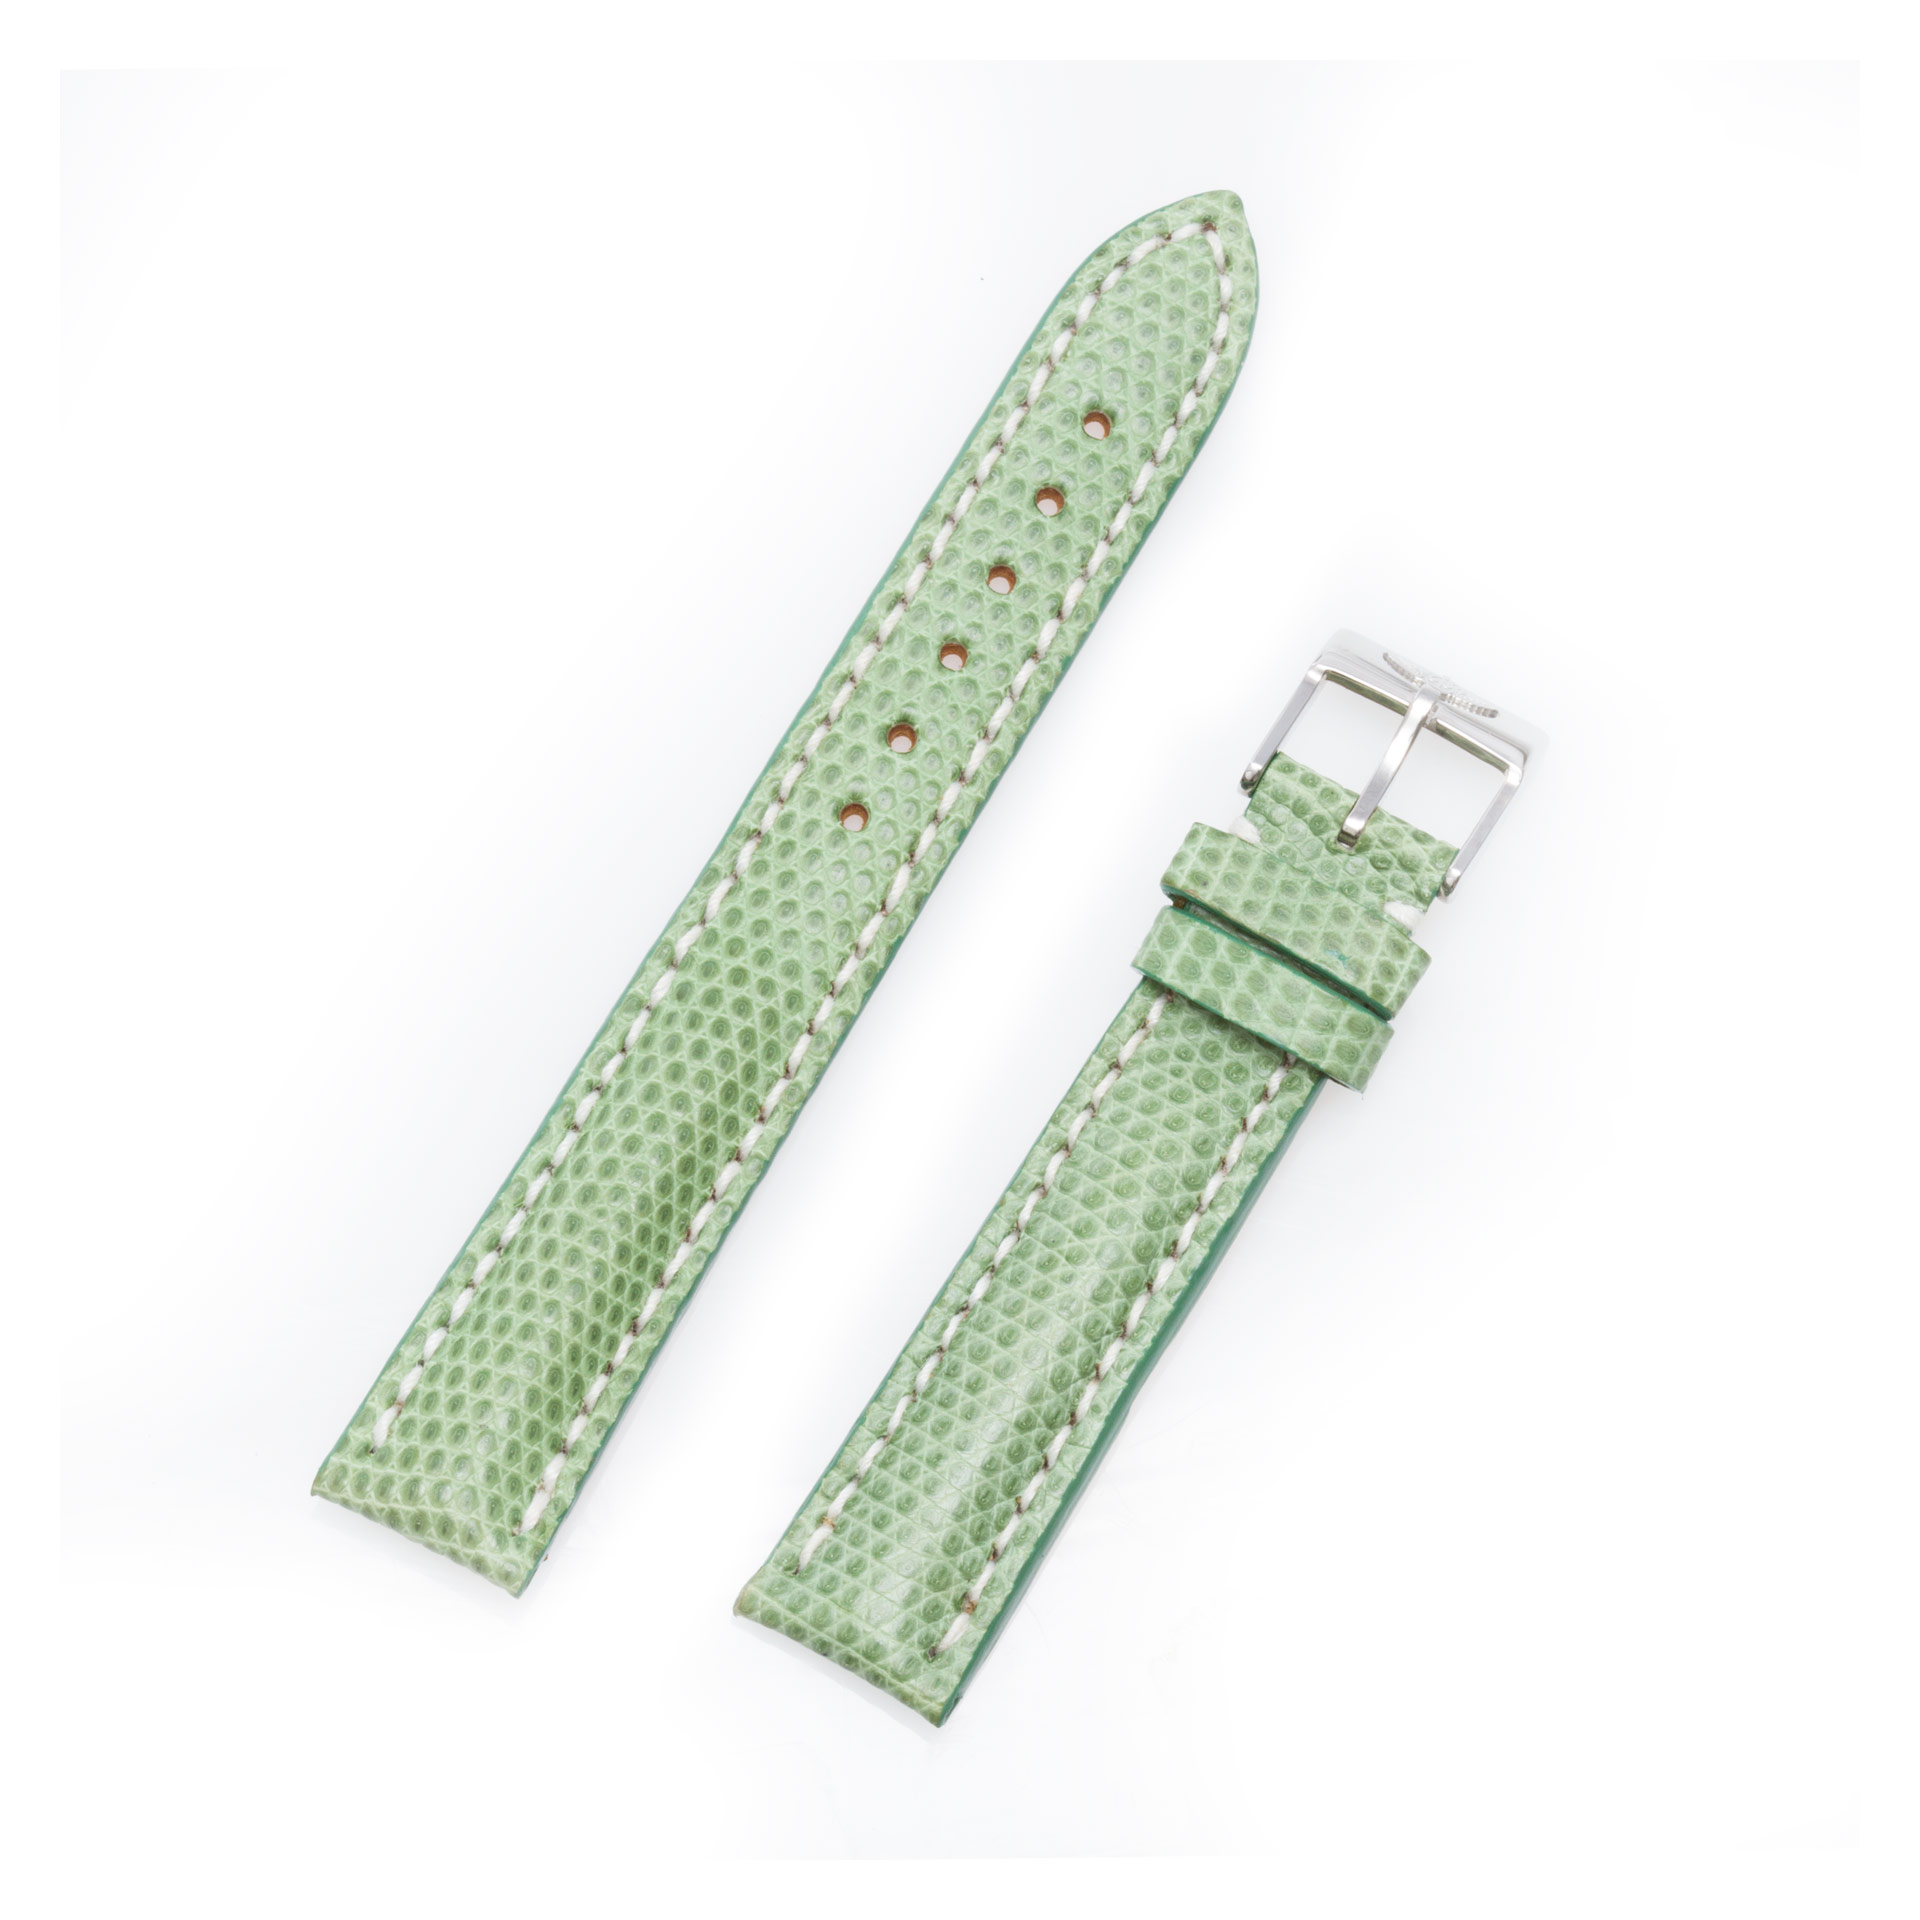 Breitling green lizard strap with tang buckle  16mm x 14mm